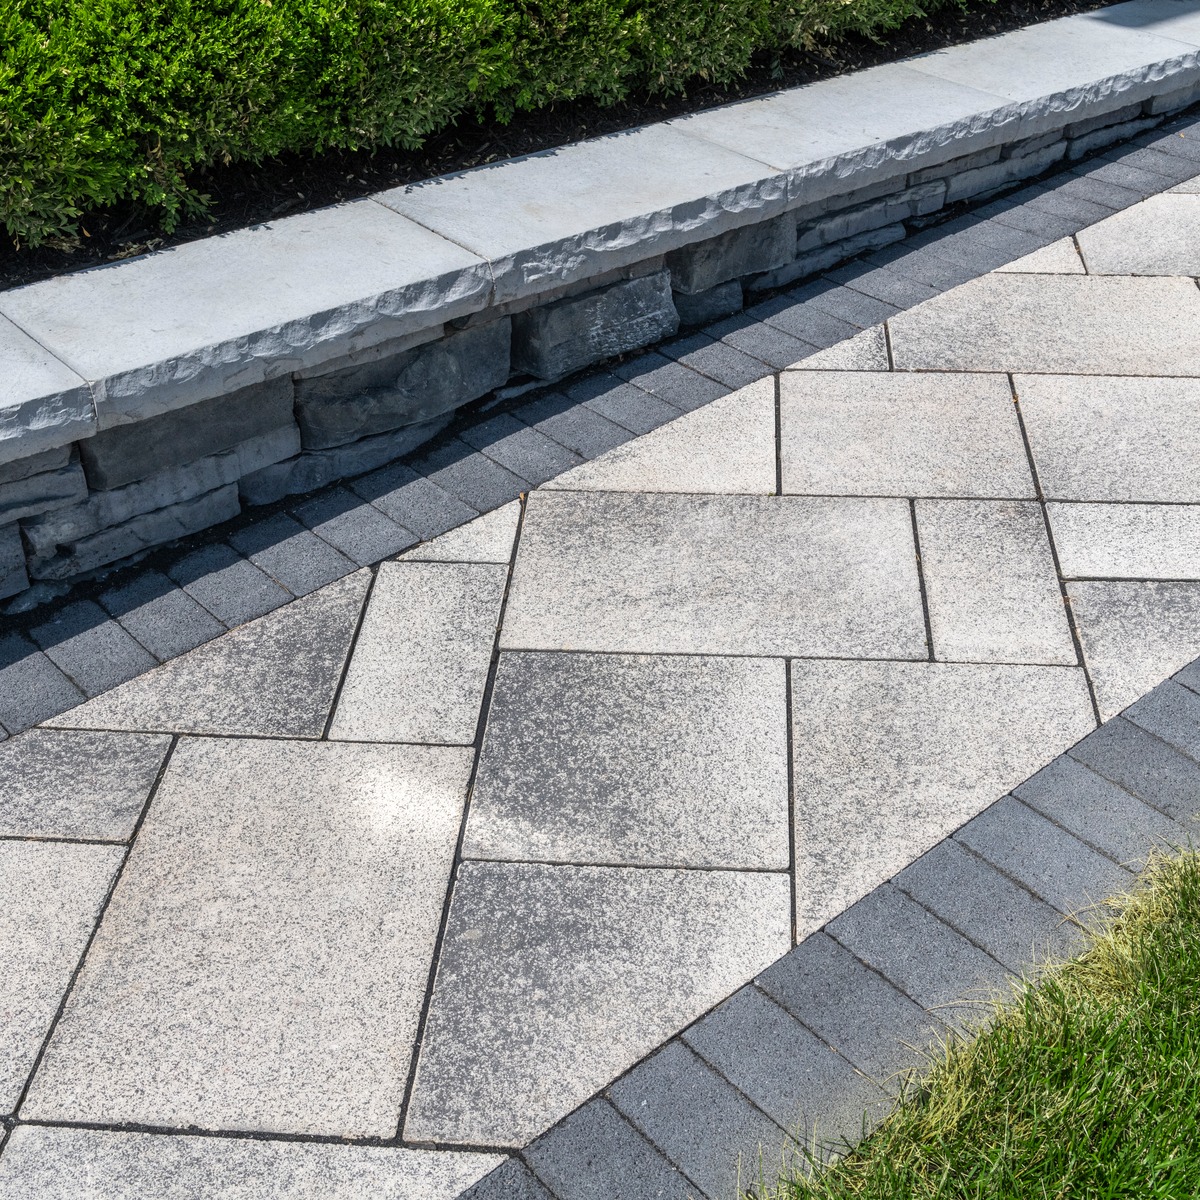 Umbriano walkway pavers laid in an angled pattern.